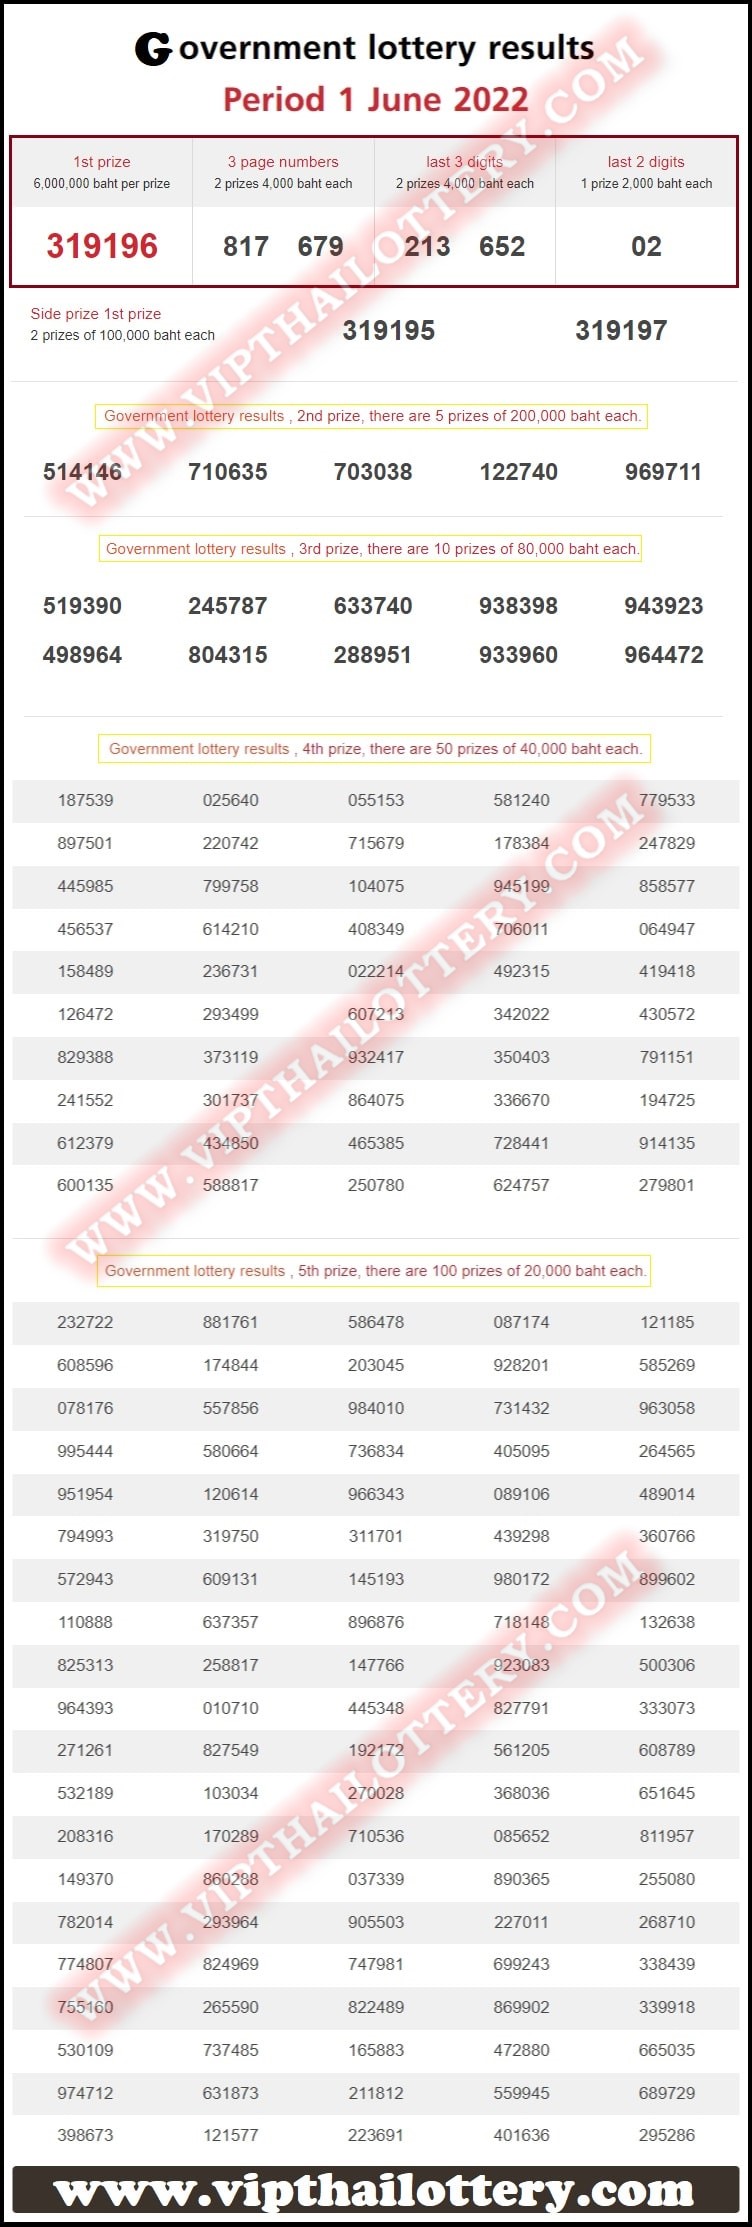 GLO Thailand Government Lottery Results Chart 01 June 2022